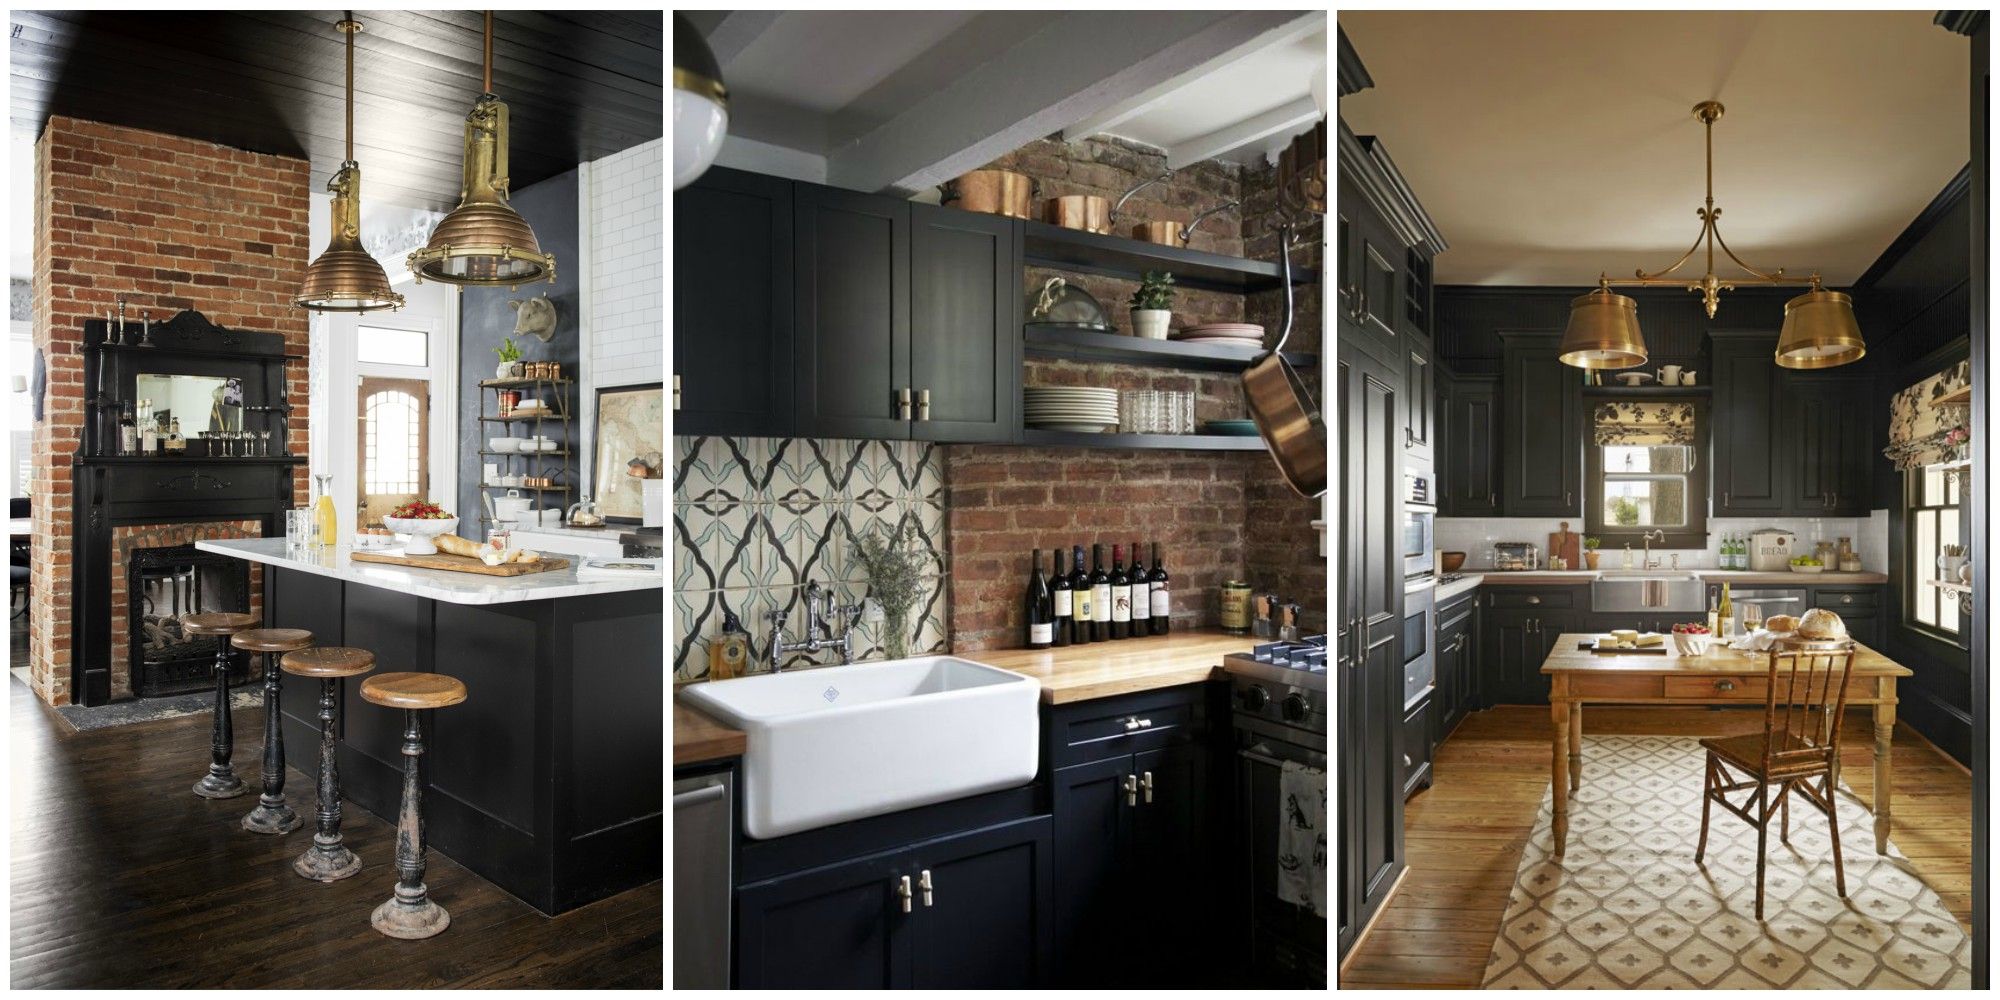 Matte Black Is Taking Over Kitchens Everywhere  Matte black kitchen, Black  kitchen cabinets, Black kitchens